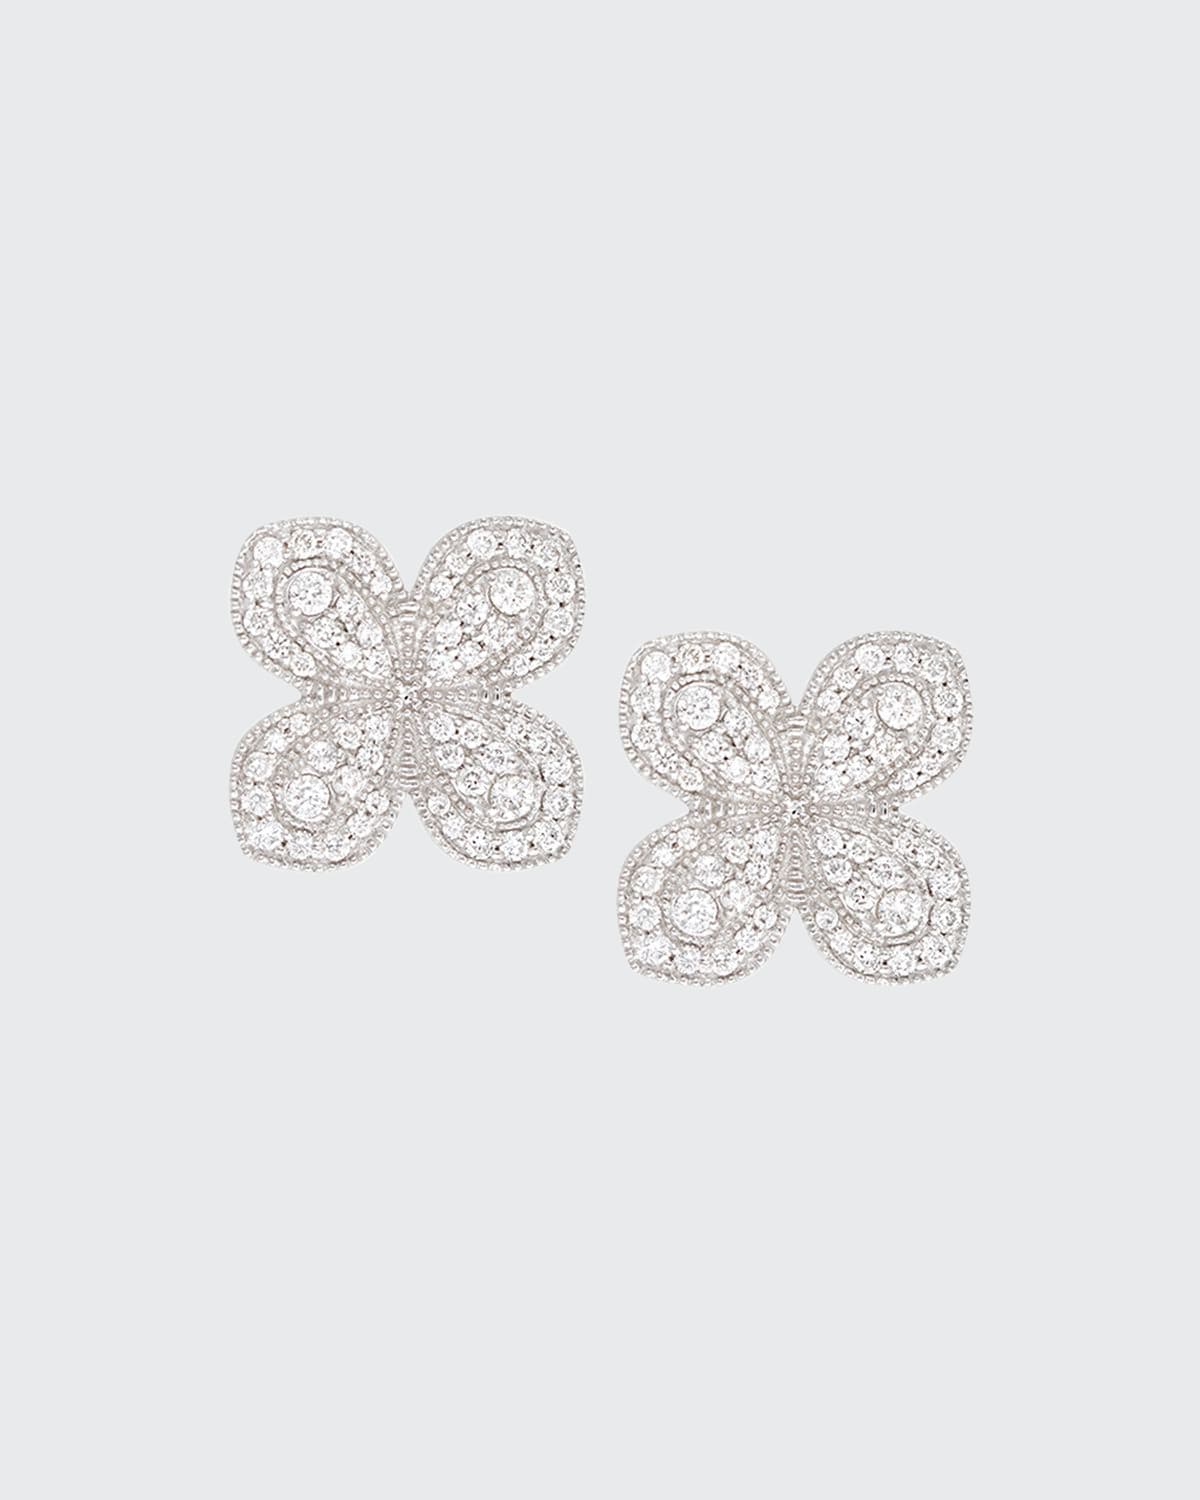 Jamie Wolf Scallop Pave Petal Earrings with Diamonds in 18K White Gold